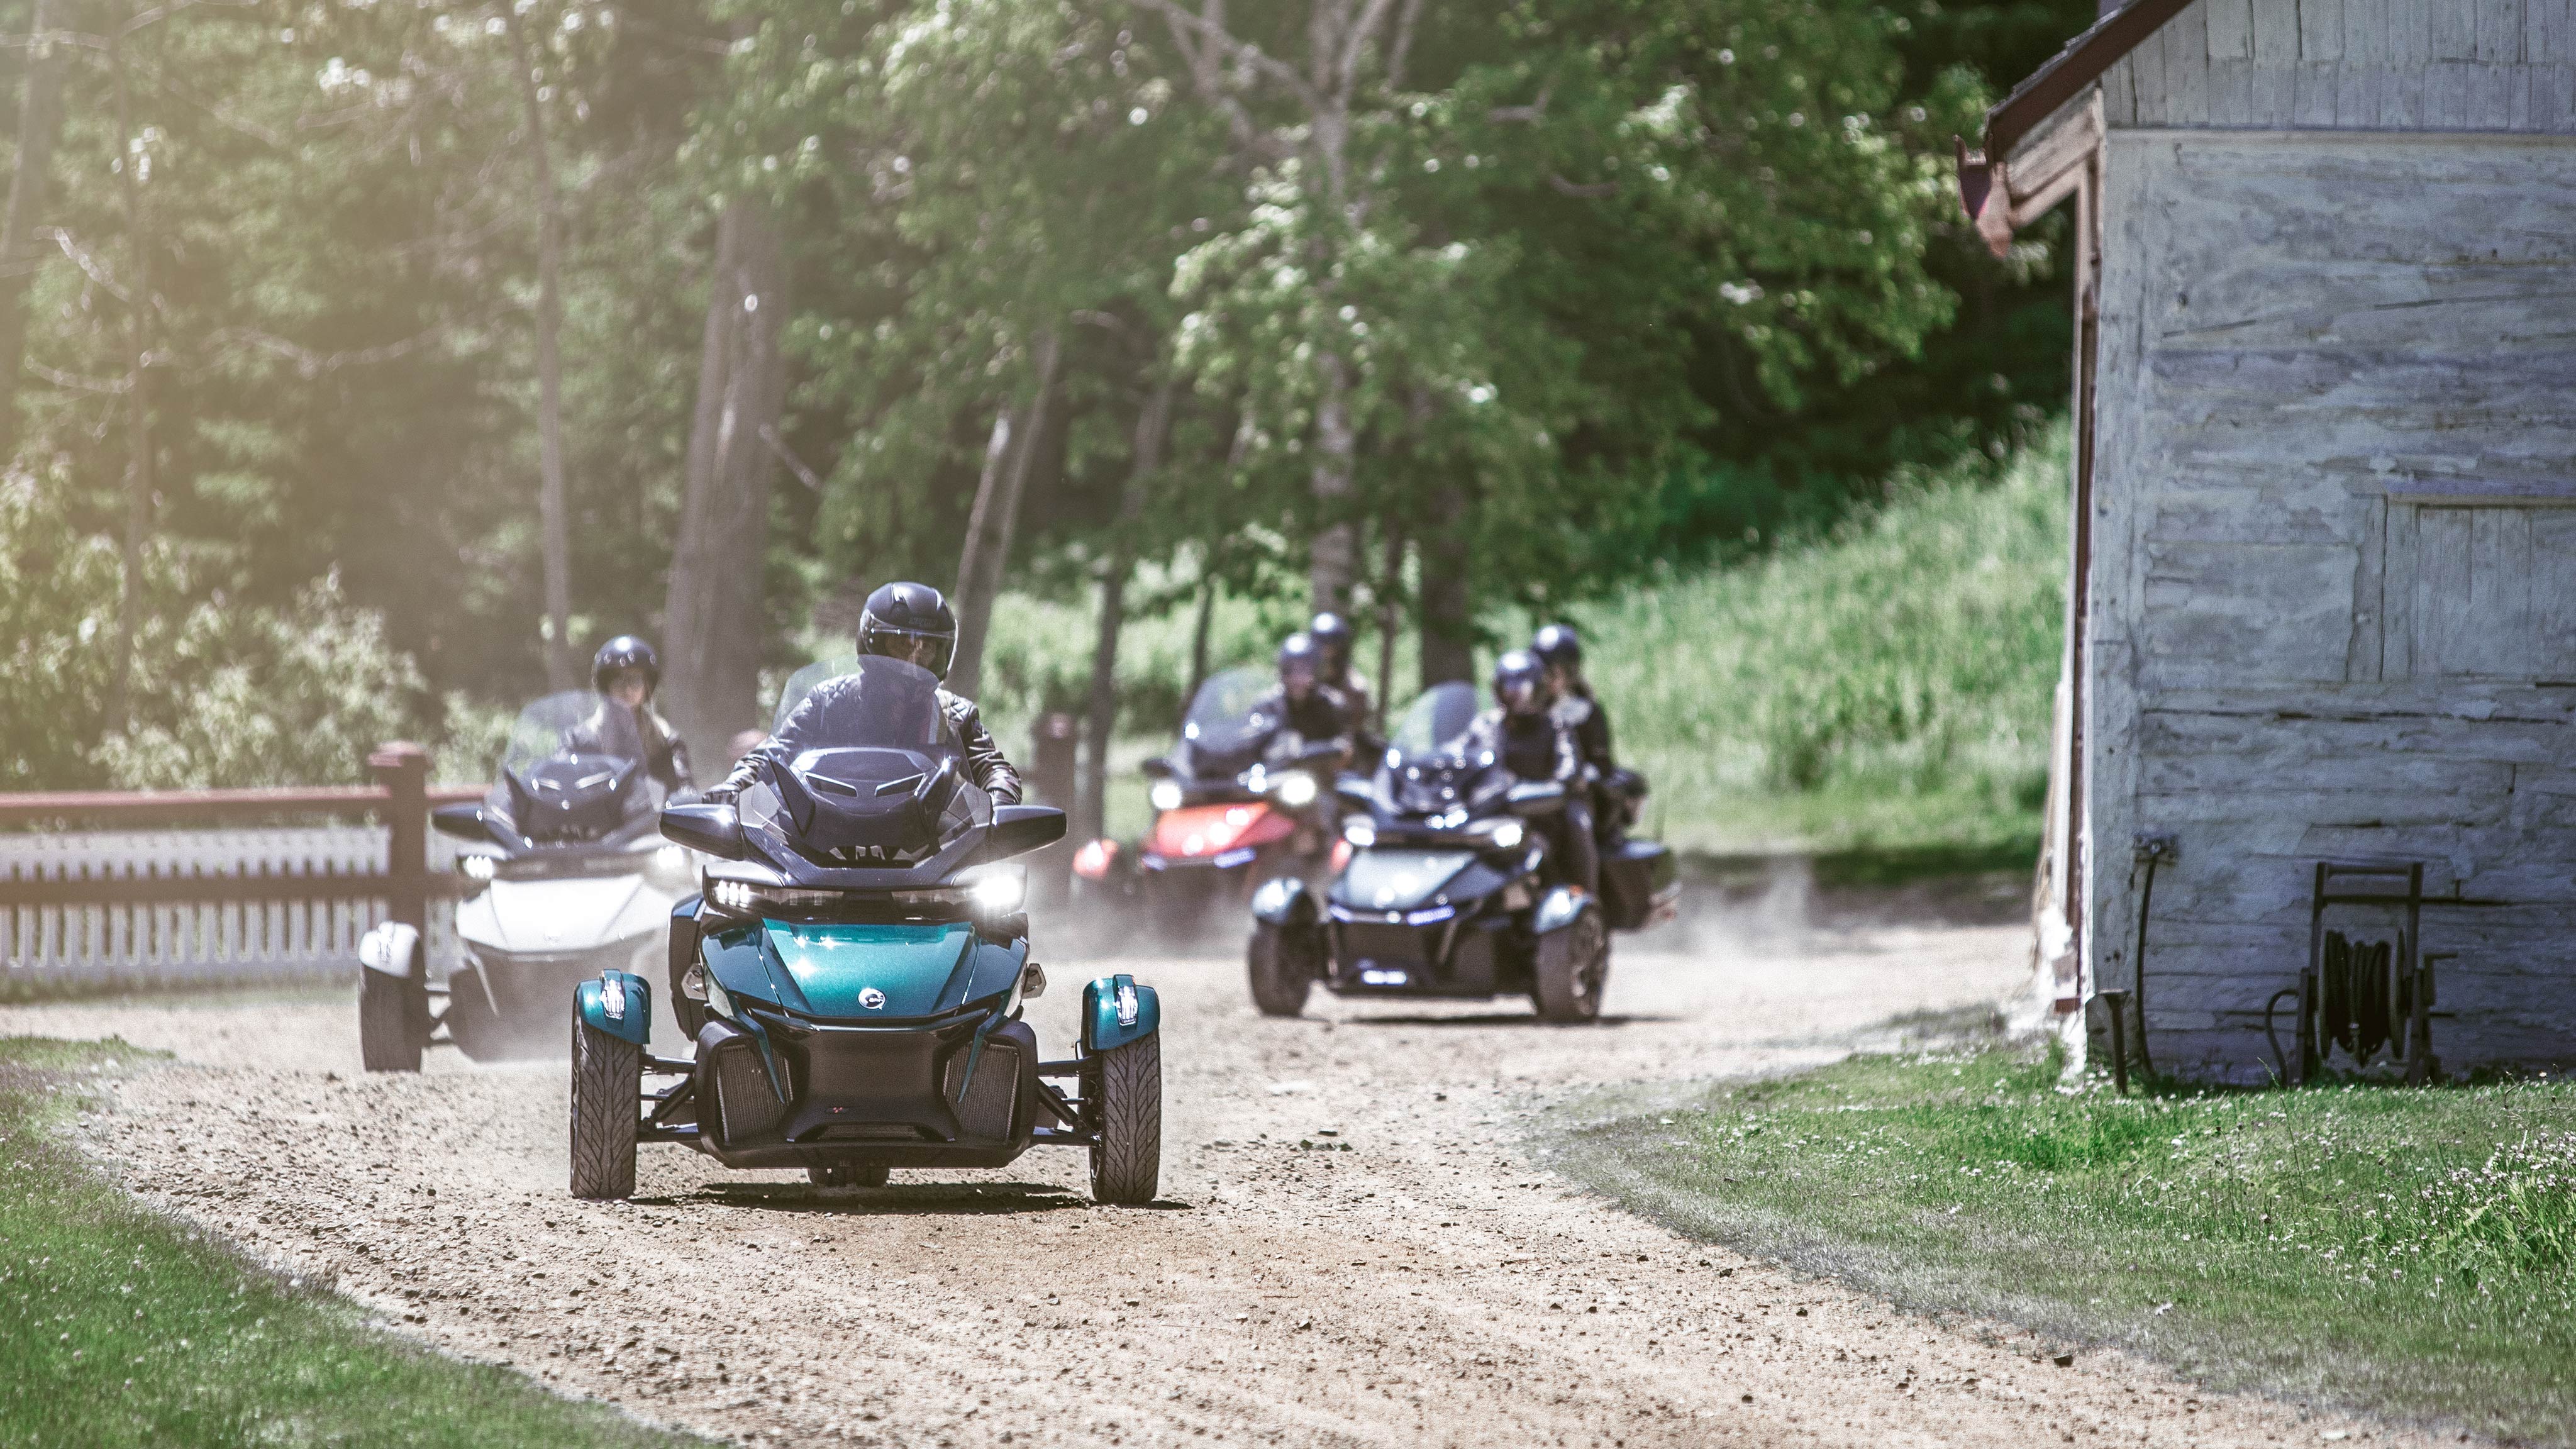 A group of riders navigating their Can-Am vehicles around the corner of a dirt road